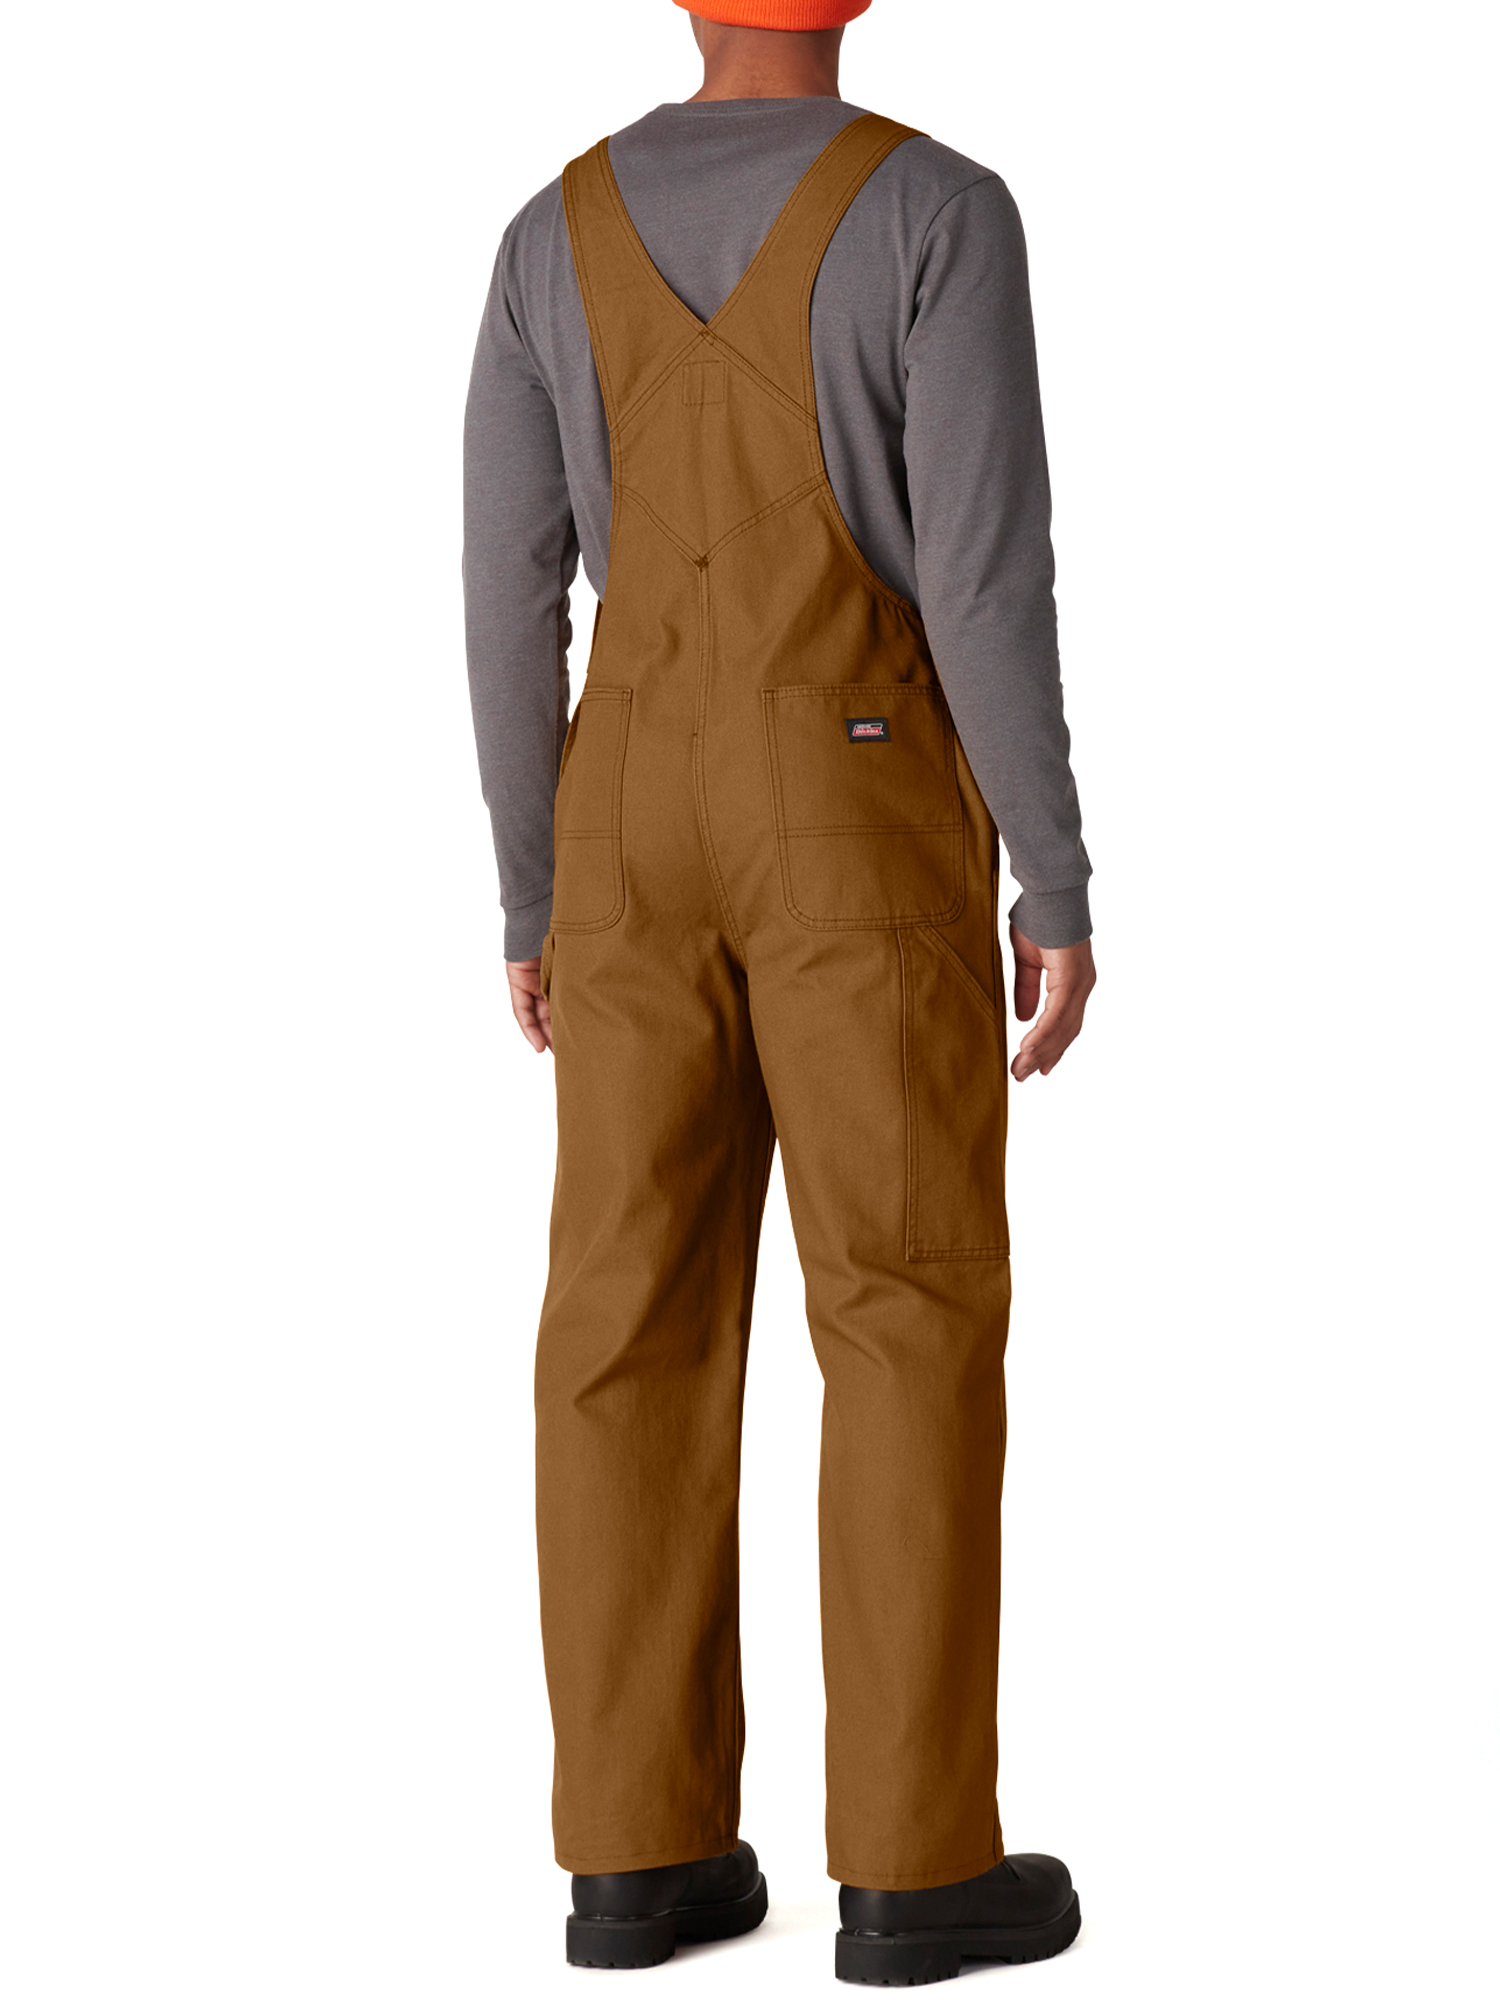 Genuine Dickies Men's Relaxed Fit Ultra Tough Workwear Bib Overall - image 2 of 5